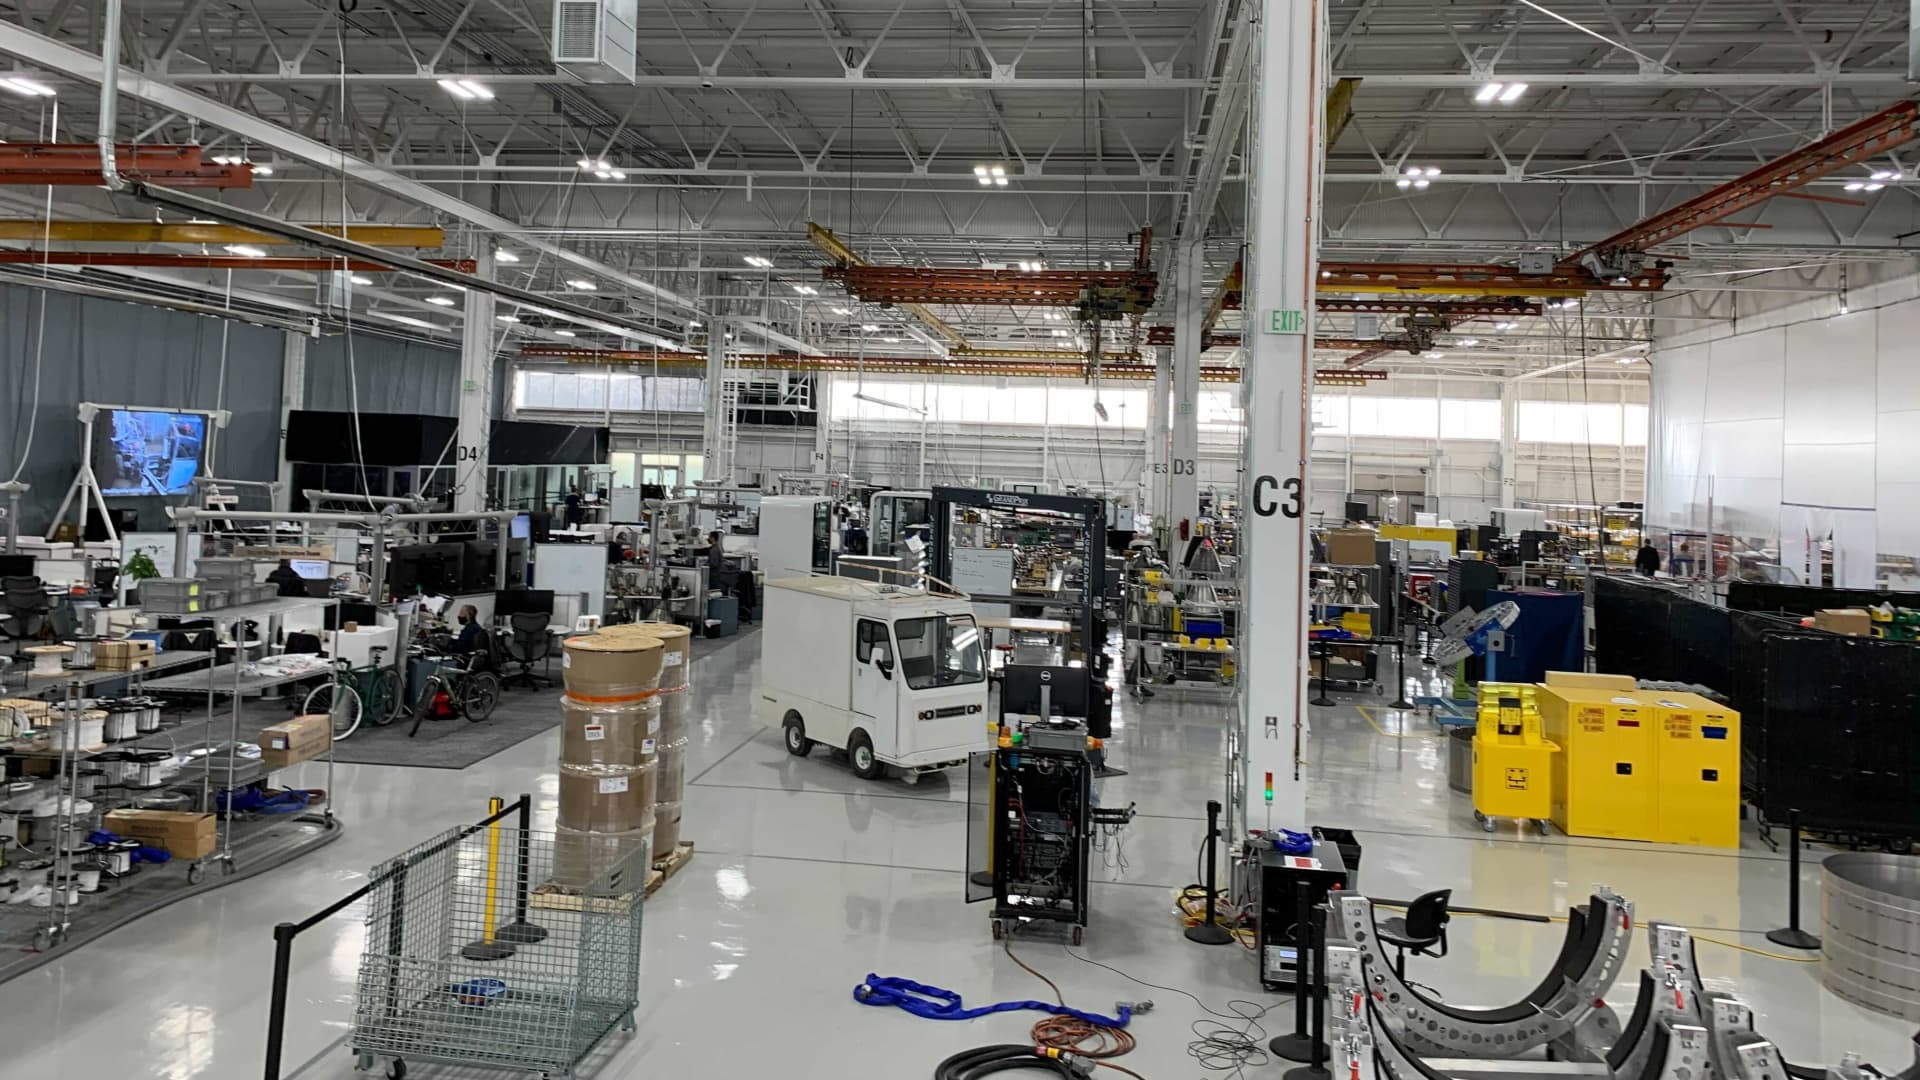 The production floor of Astra's headquarters in Alameda, California.